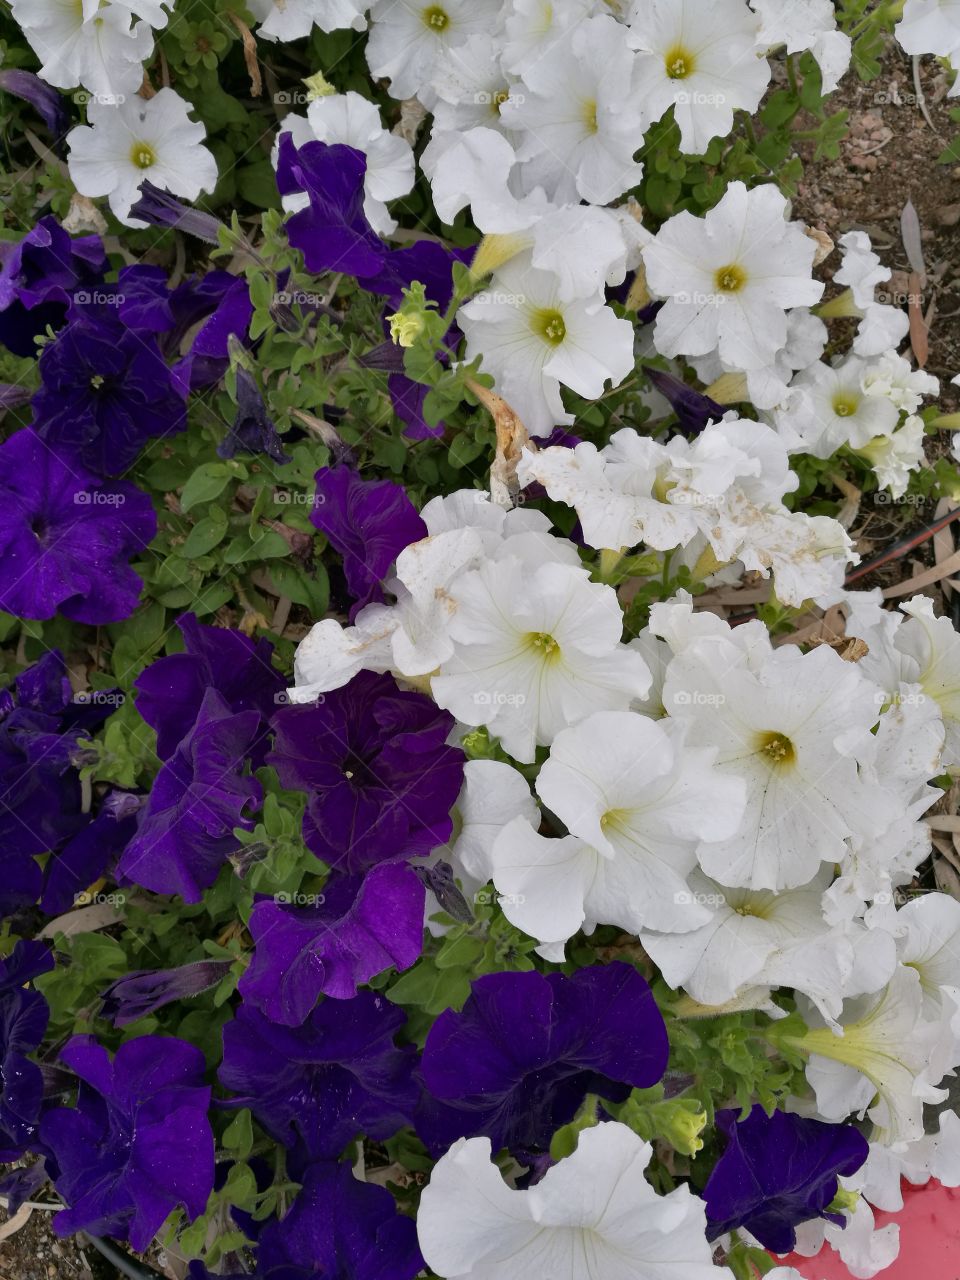 Closeup of beautiful petunias with violet and white flowers.